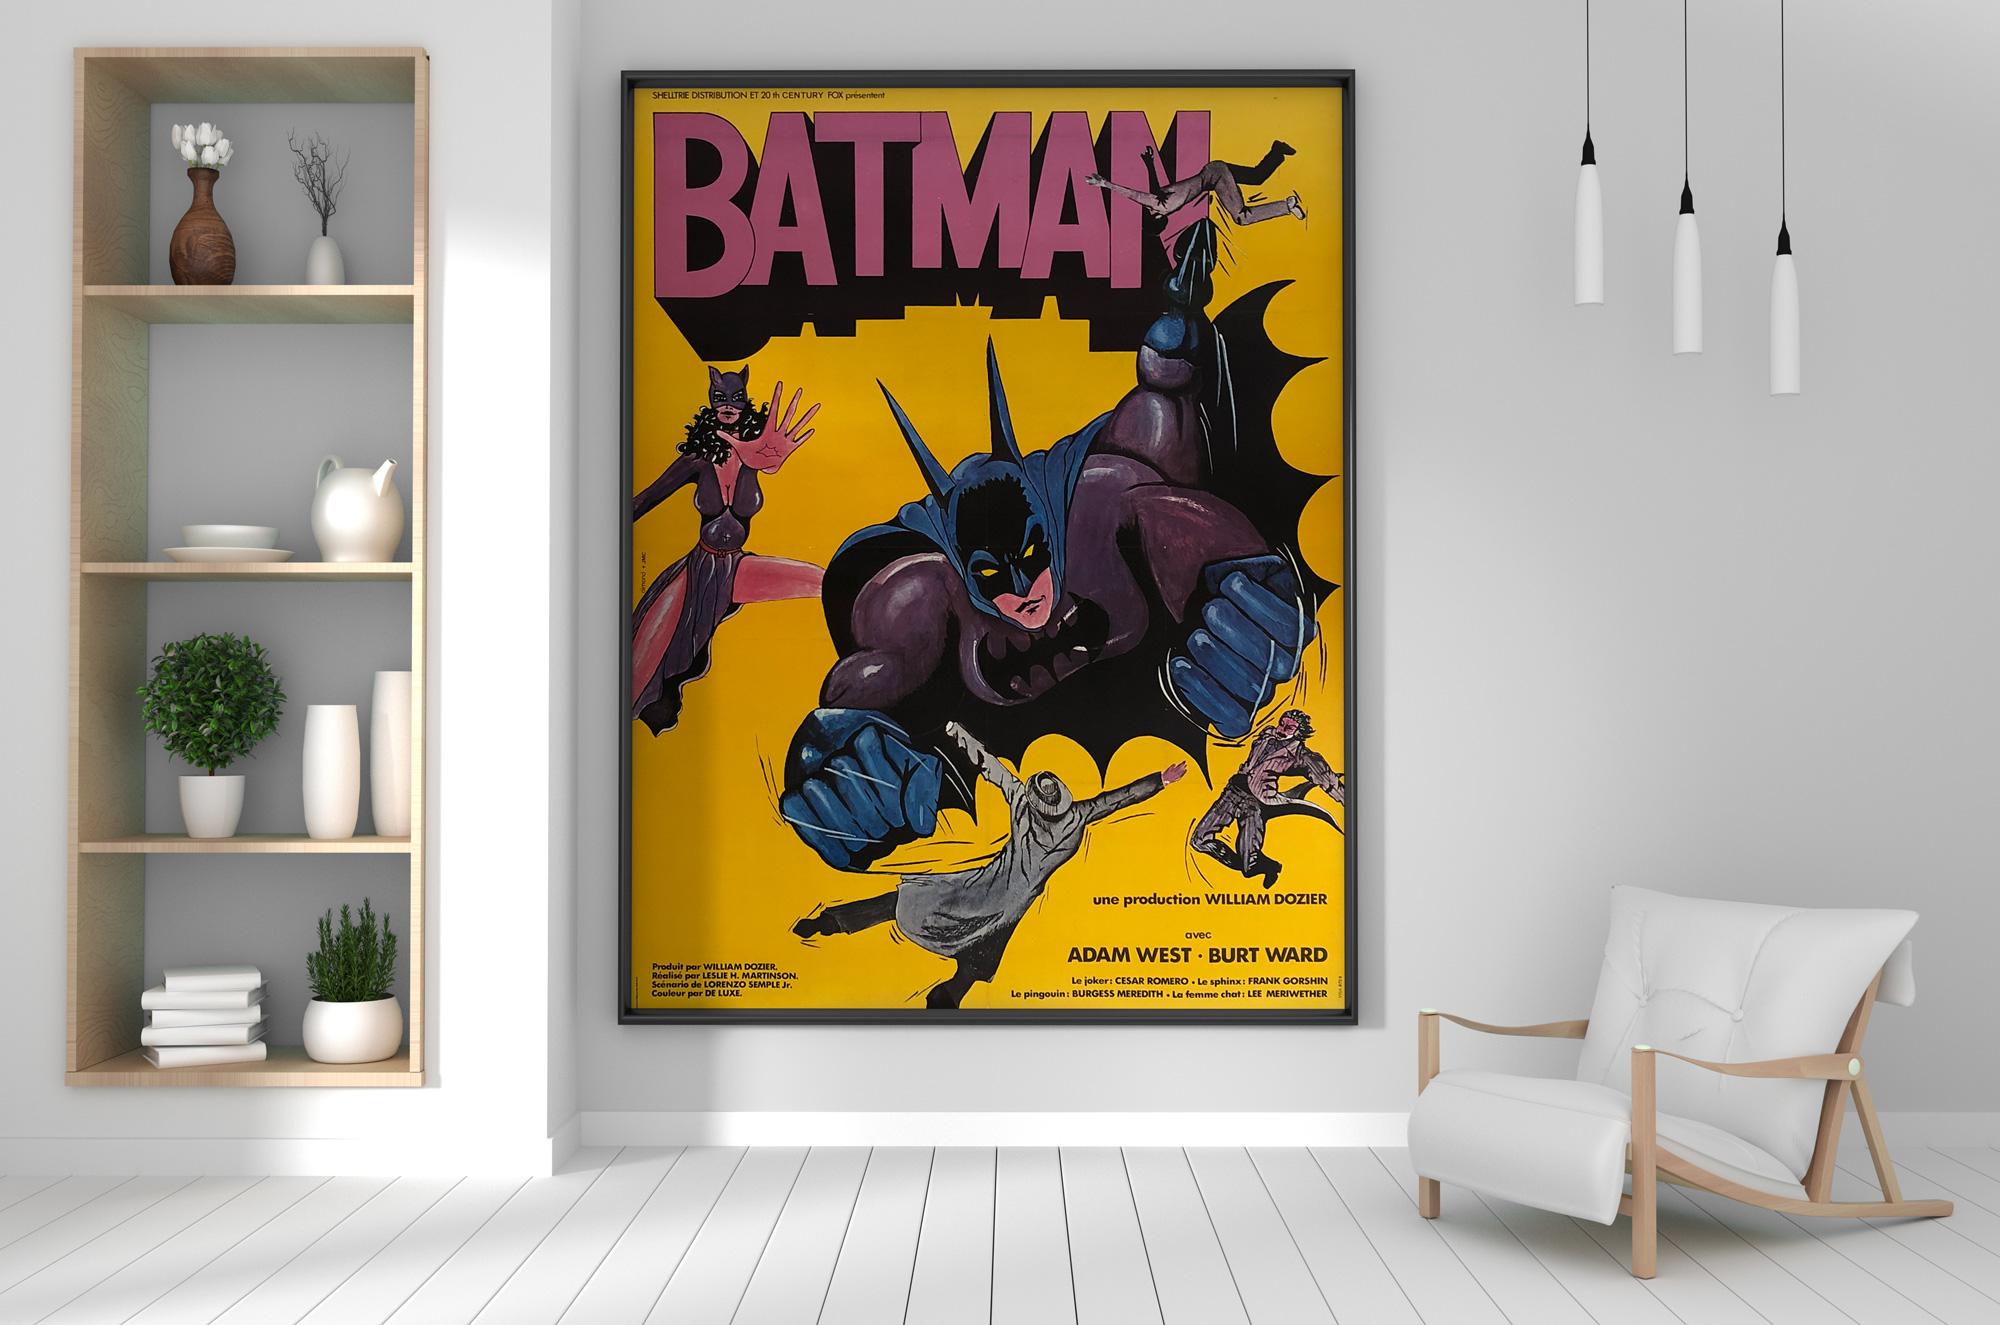 Fabulous original Batman re-release French film poster from early 1970s. Superb artwork and colors on a scale that packs a serious Kapow!

This original vintage move poster is sized 45 1/2 x 60 inches (48 x 63 1/2 inches including the